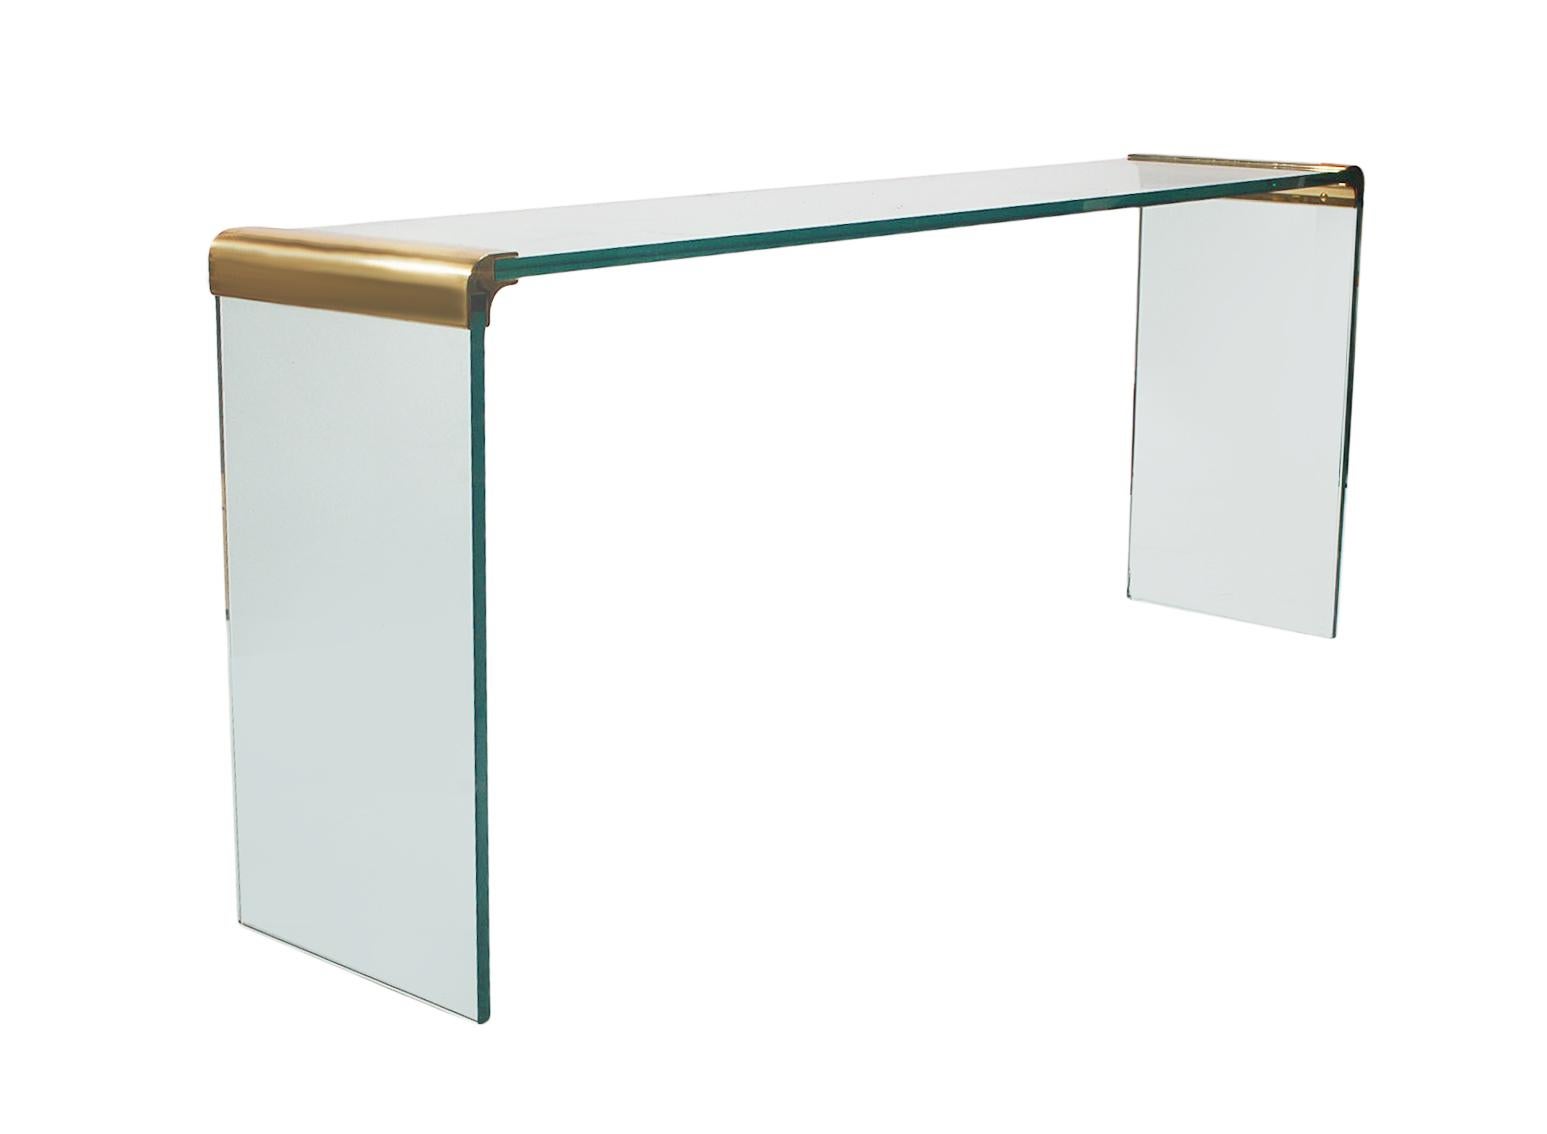 Late 20th Century Mid Century Modern Glass & Brass Waterfall Console or Sofa Table by Leon Rosen